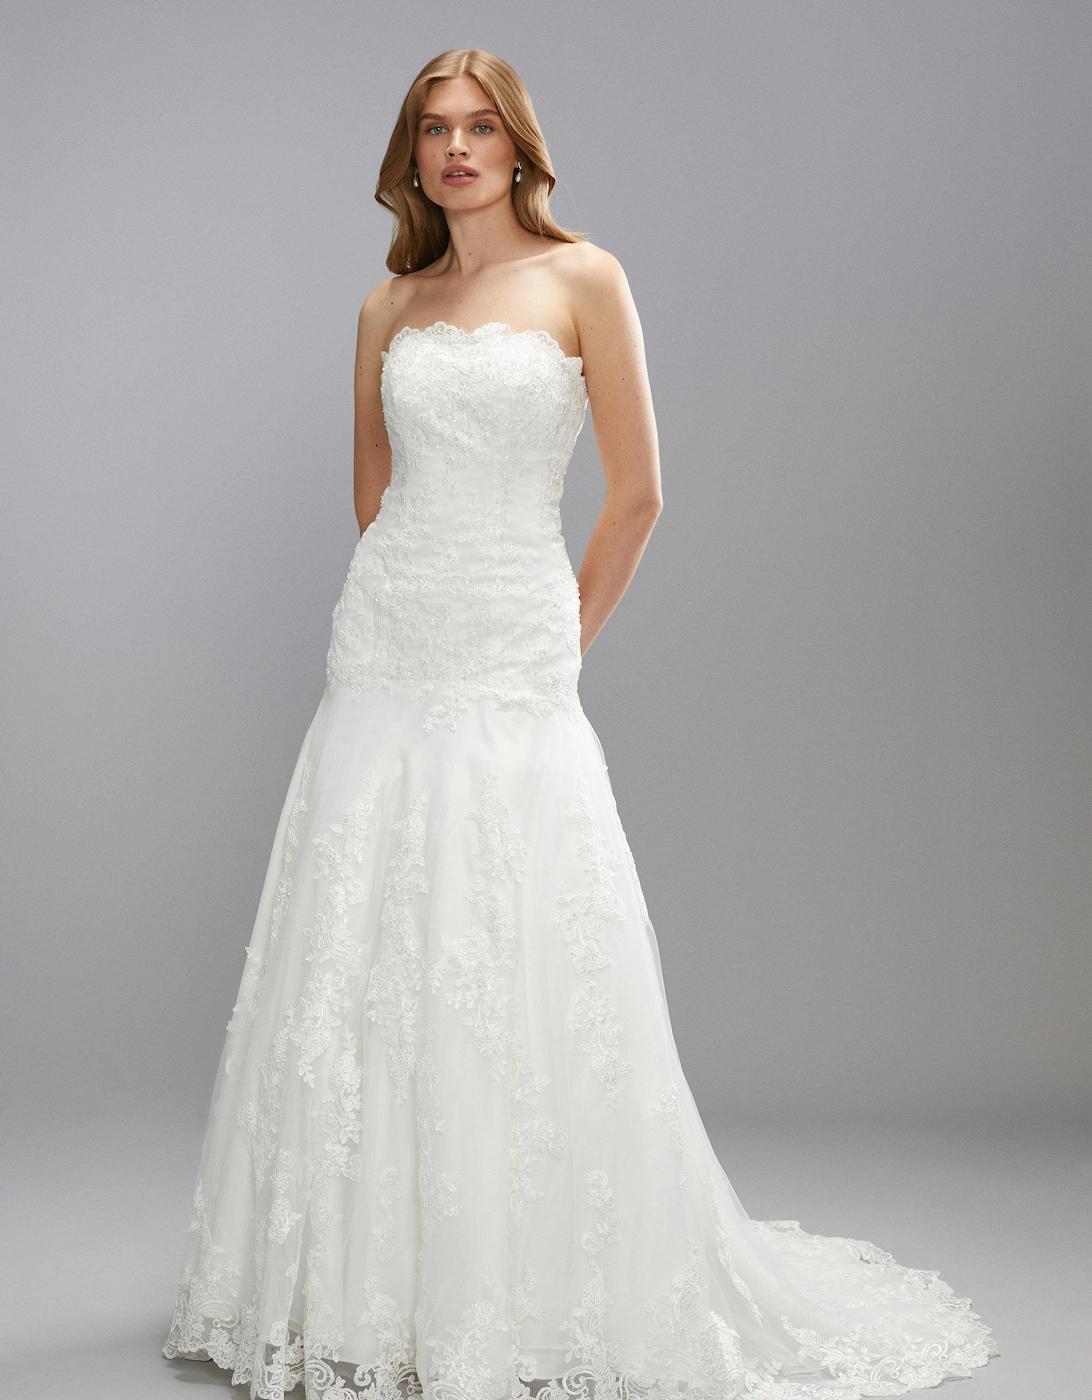 Premium Lace Sweetheart Princess Wedding Dress With Full Skirt, 7 of 6